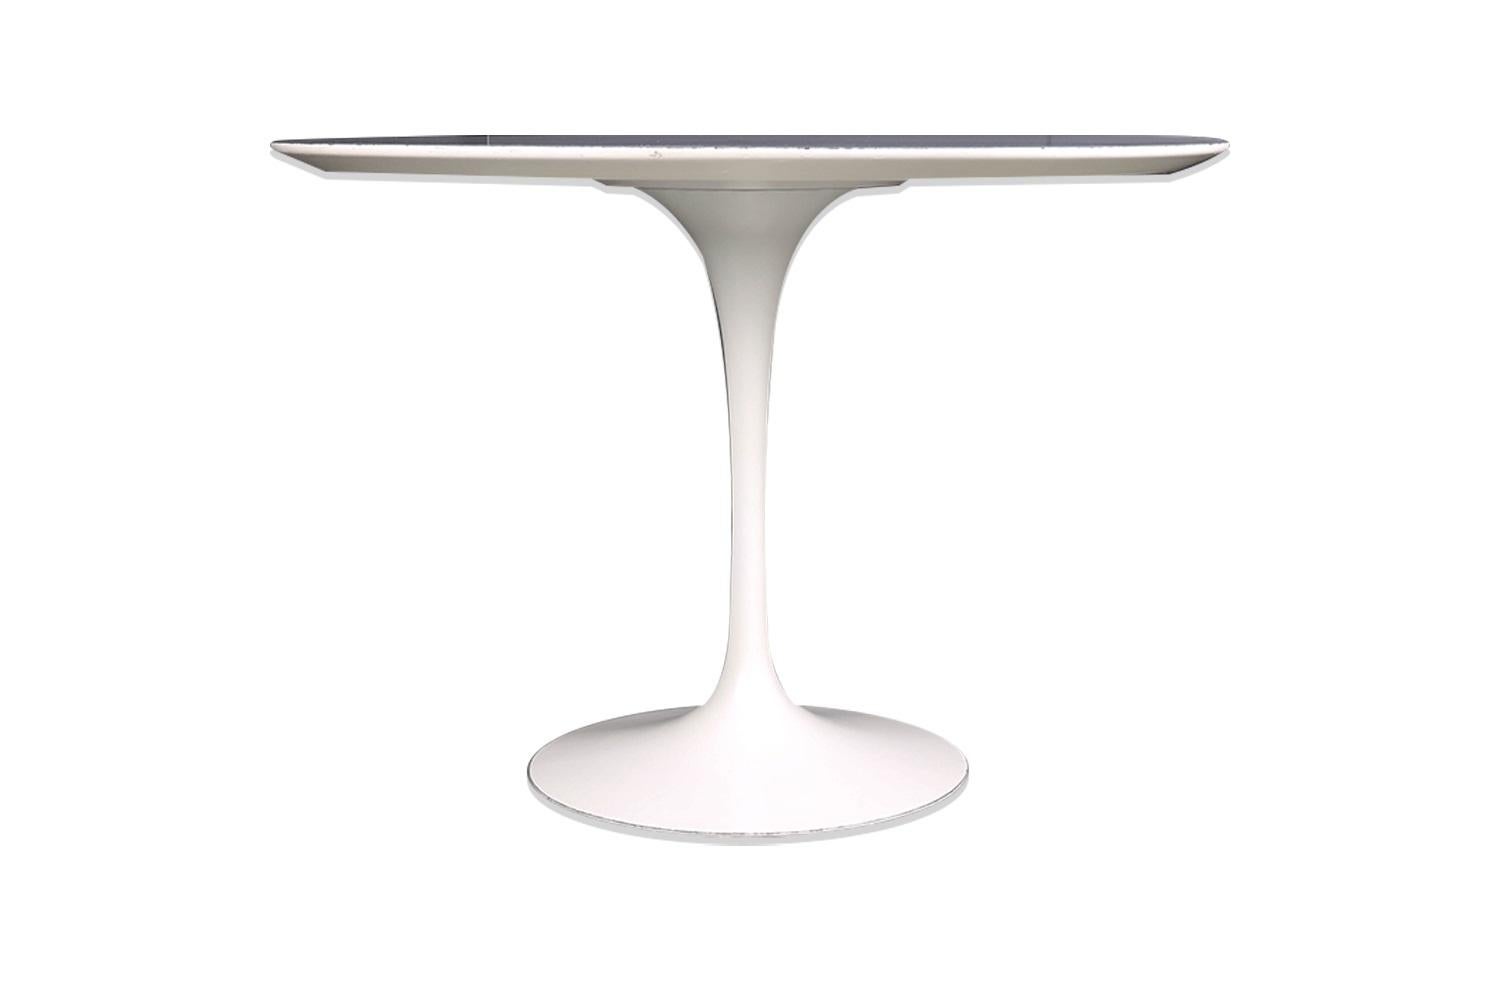 Classic Mid-Century Modern original, round Saarinen Tulip pedestal table for Knoll designed by Eero Saarinen (USA 1910-1961) for Knoll Furniture International in 1956. Comfortably seats four people. Features original white satin smooth laminate 42?